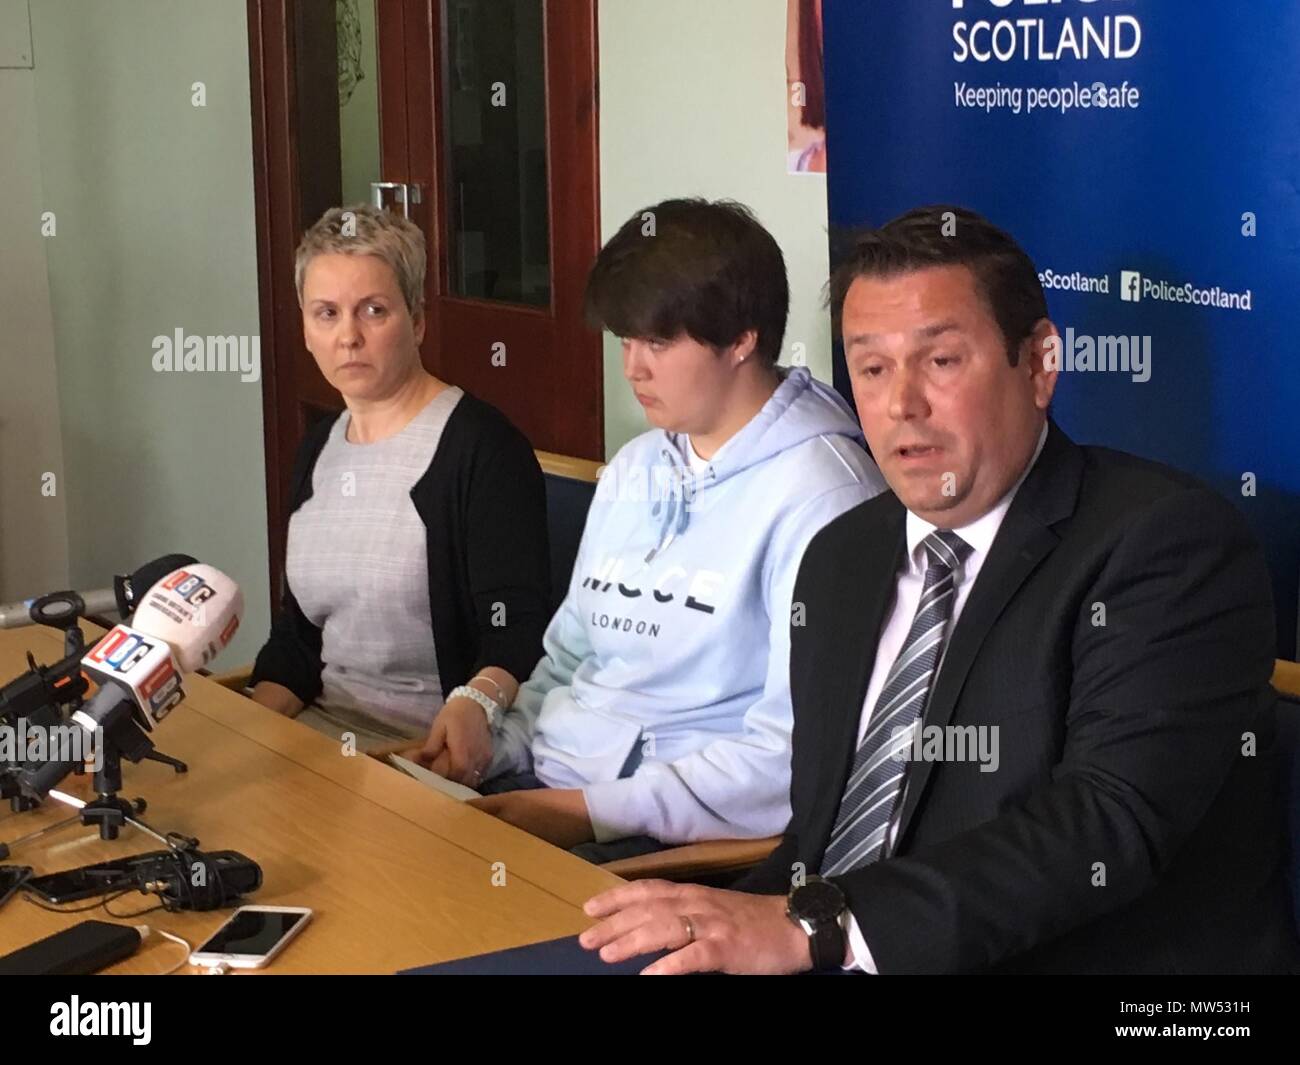 BEST QUALITY AVAILABLE Patricia Henry's cousin, Jacqueline McCarthy (left) and Patricia's daughter, Alannah McGrory (centre) with DCI Alan Sommerville at a press conference in Paisley, Renfrewshire, appealing for information on the whereabouts of Alannah's mother who has been missing from Girvan, South Ayrshire since last November. Stock Photo